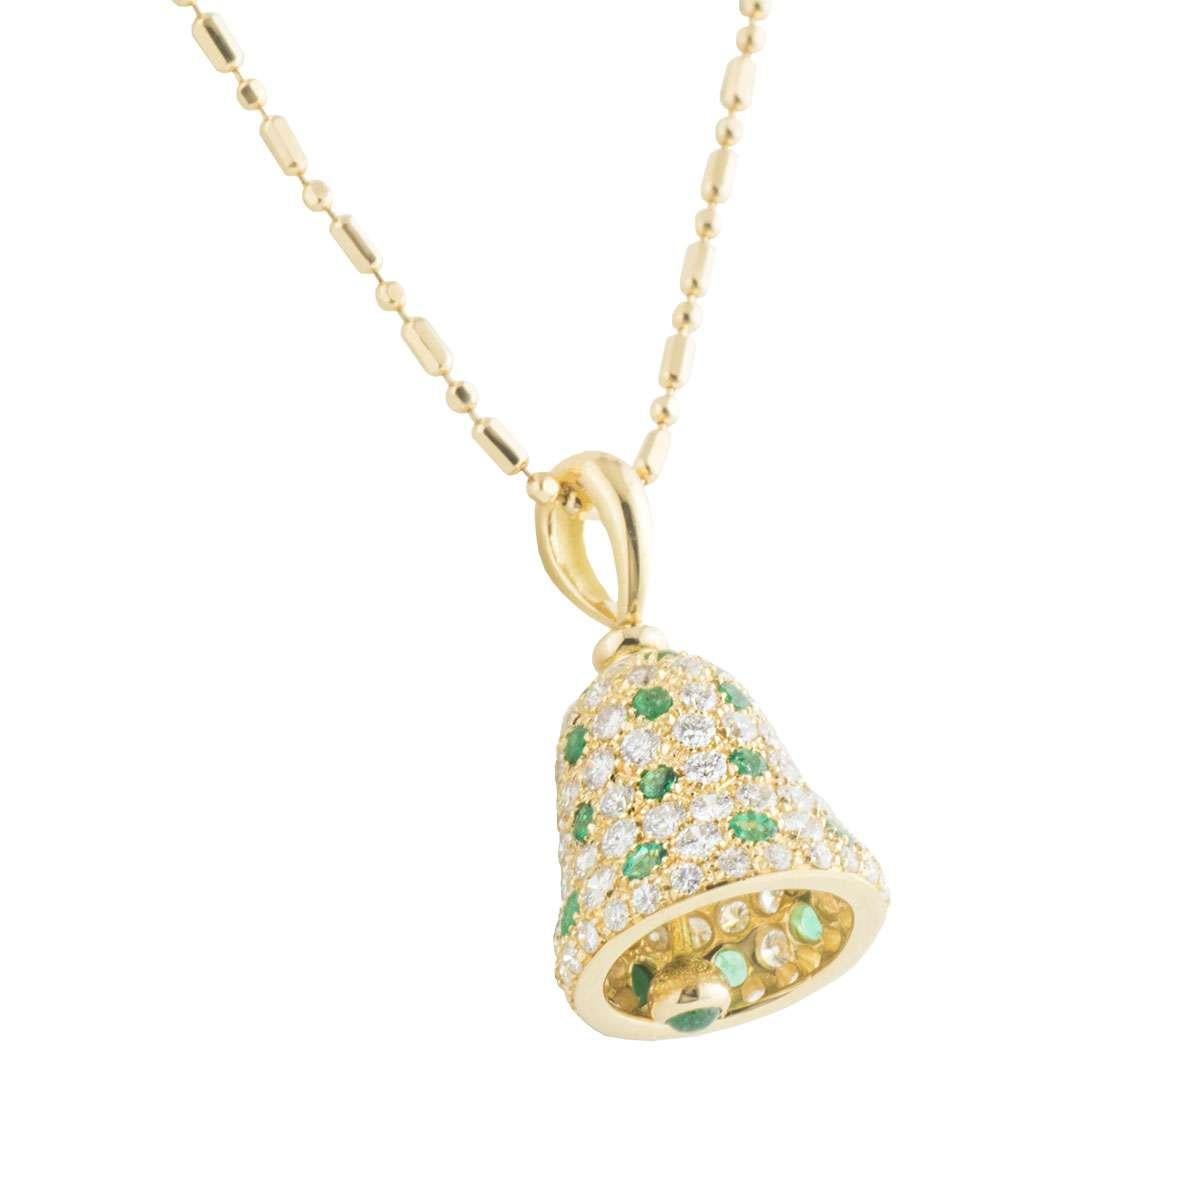 A beautiful 18k yellow gold diamond and emerald bell pendant. The pendant comprises of a bell motif encrusted with round brilliant cut diamonds alternating with round brilliant cut emeralds. The pendant has a gold bar dangling freely through the